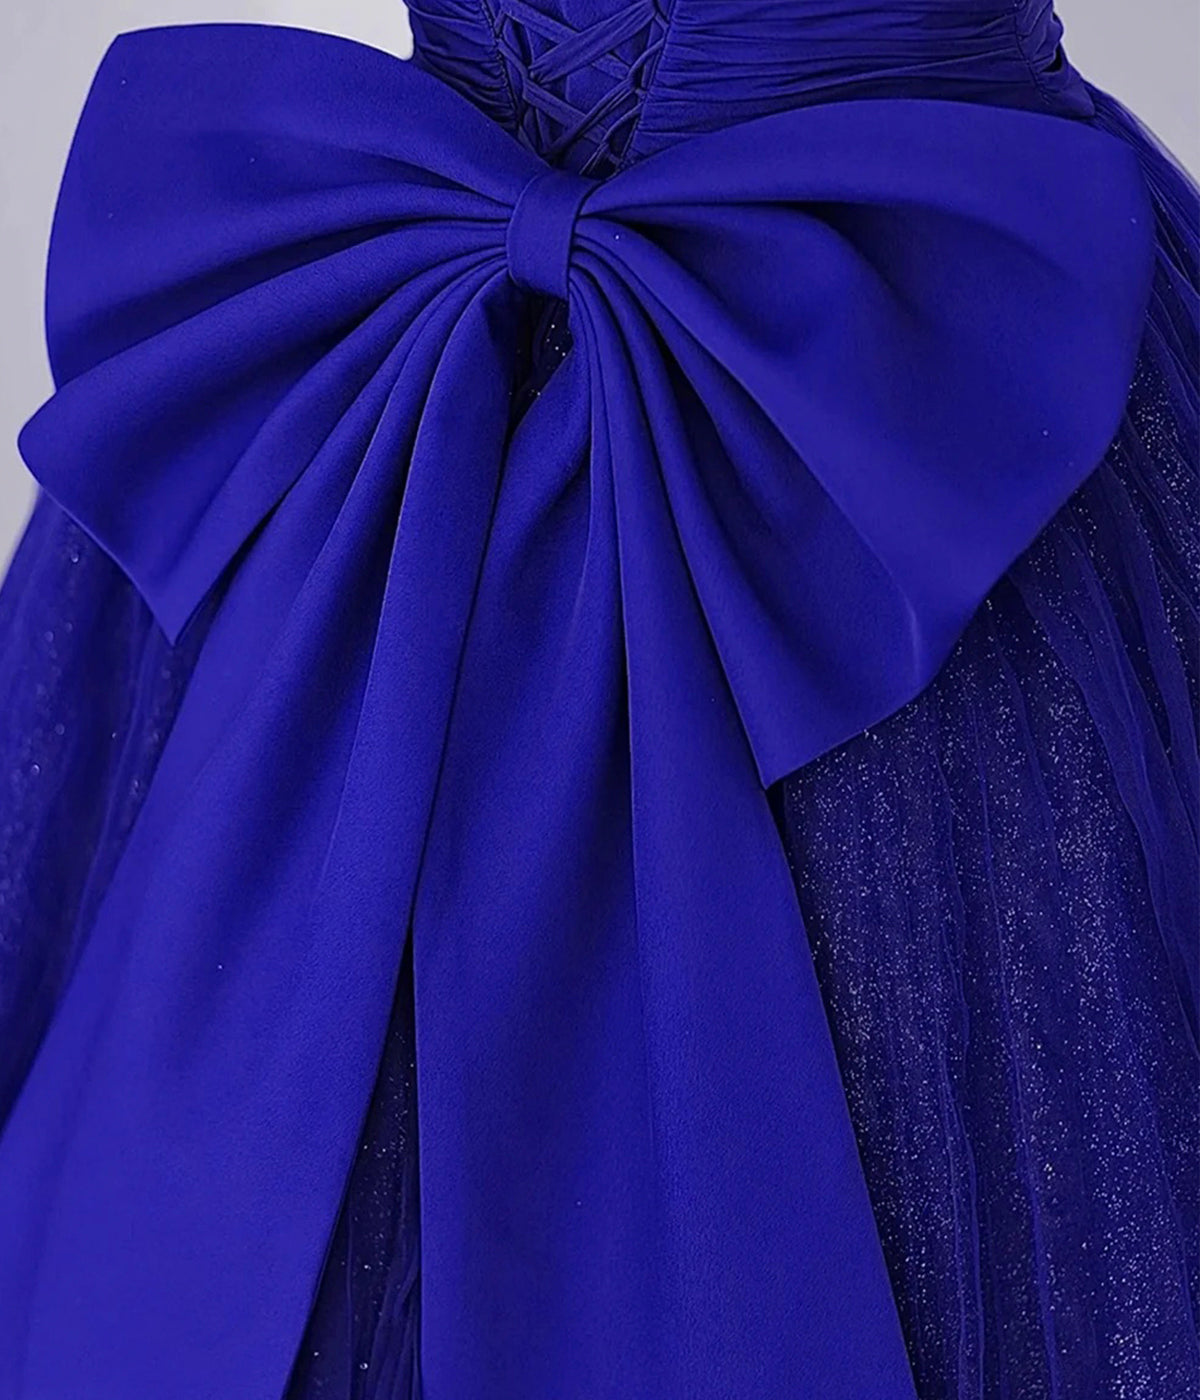 Bridesmaid Dress For Girls, Cute Tulle Long Prom Dress with Bow, Royal Blue Short Sleeve Evening Party Dress